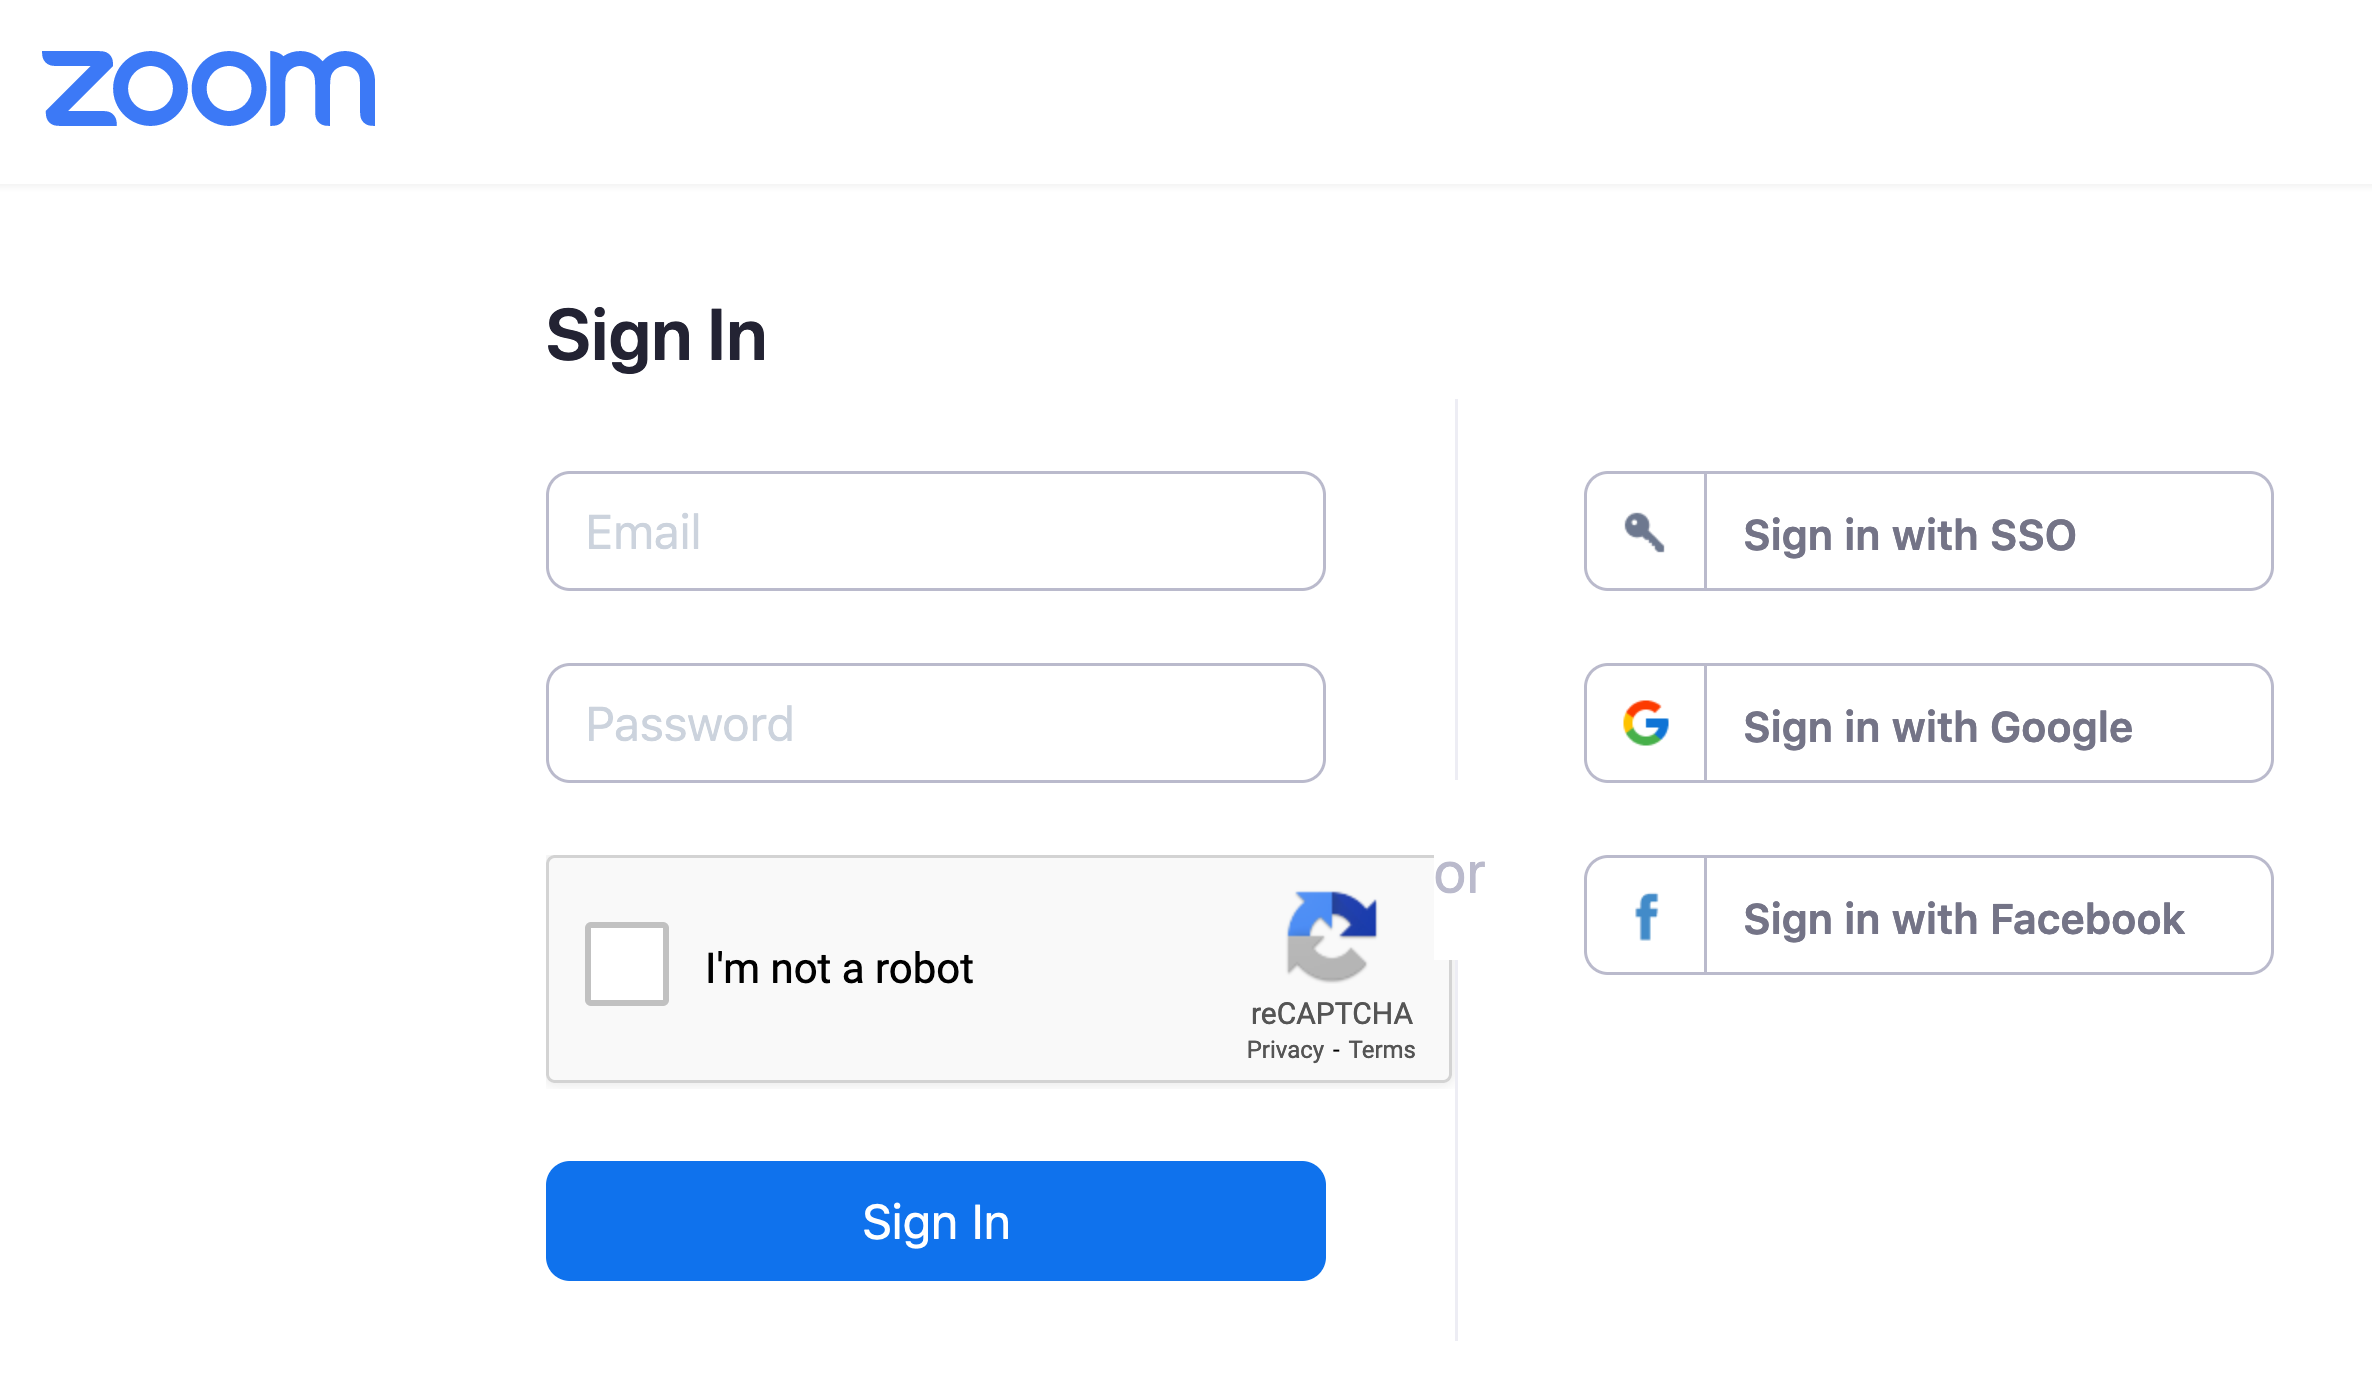 The Zoom platform shows a sign in page with a field for a username and password